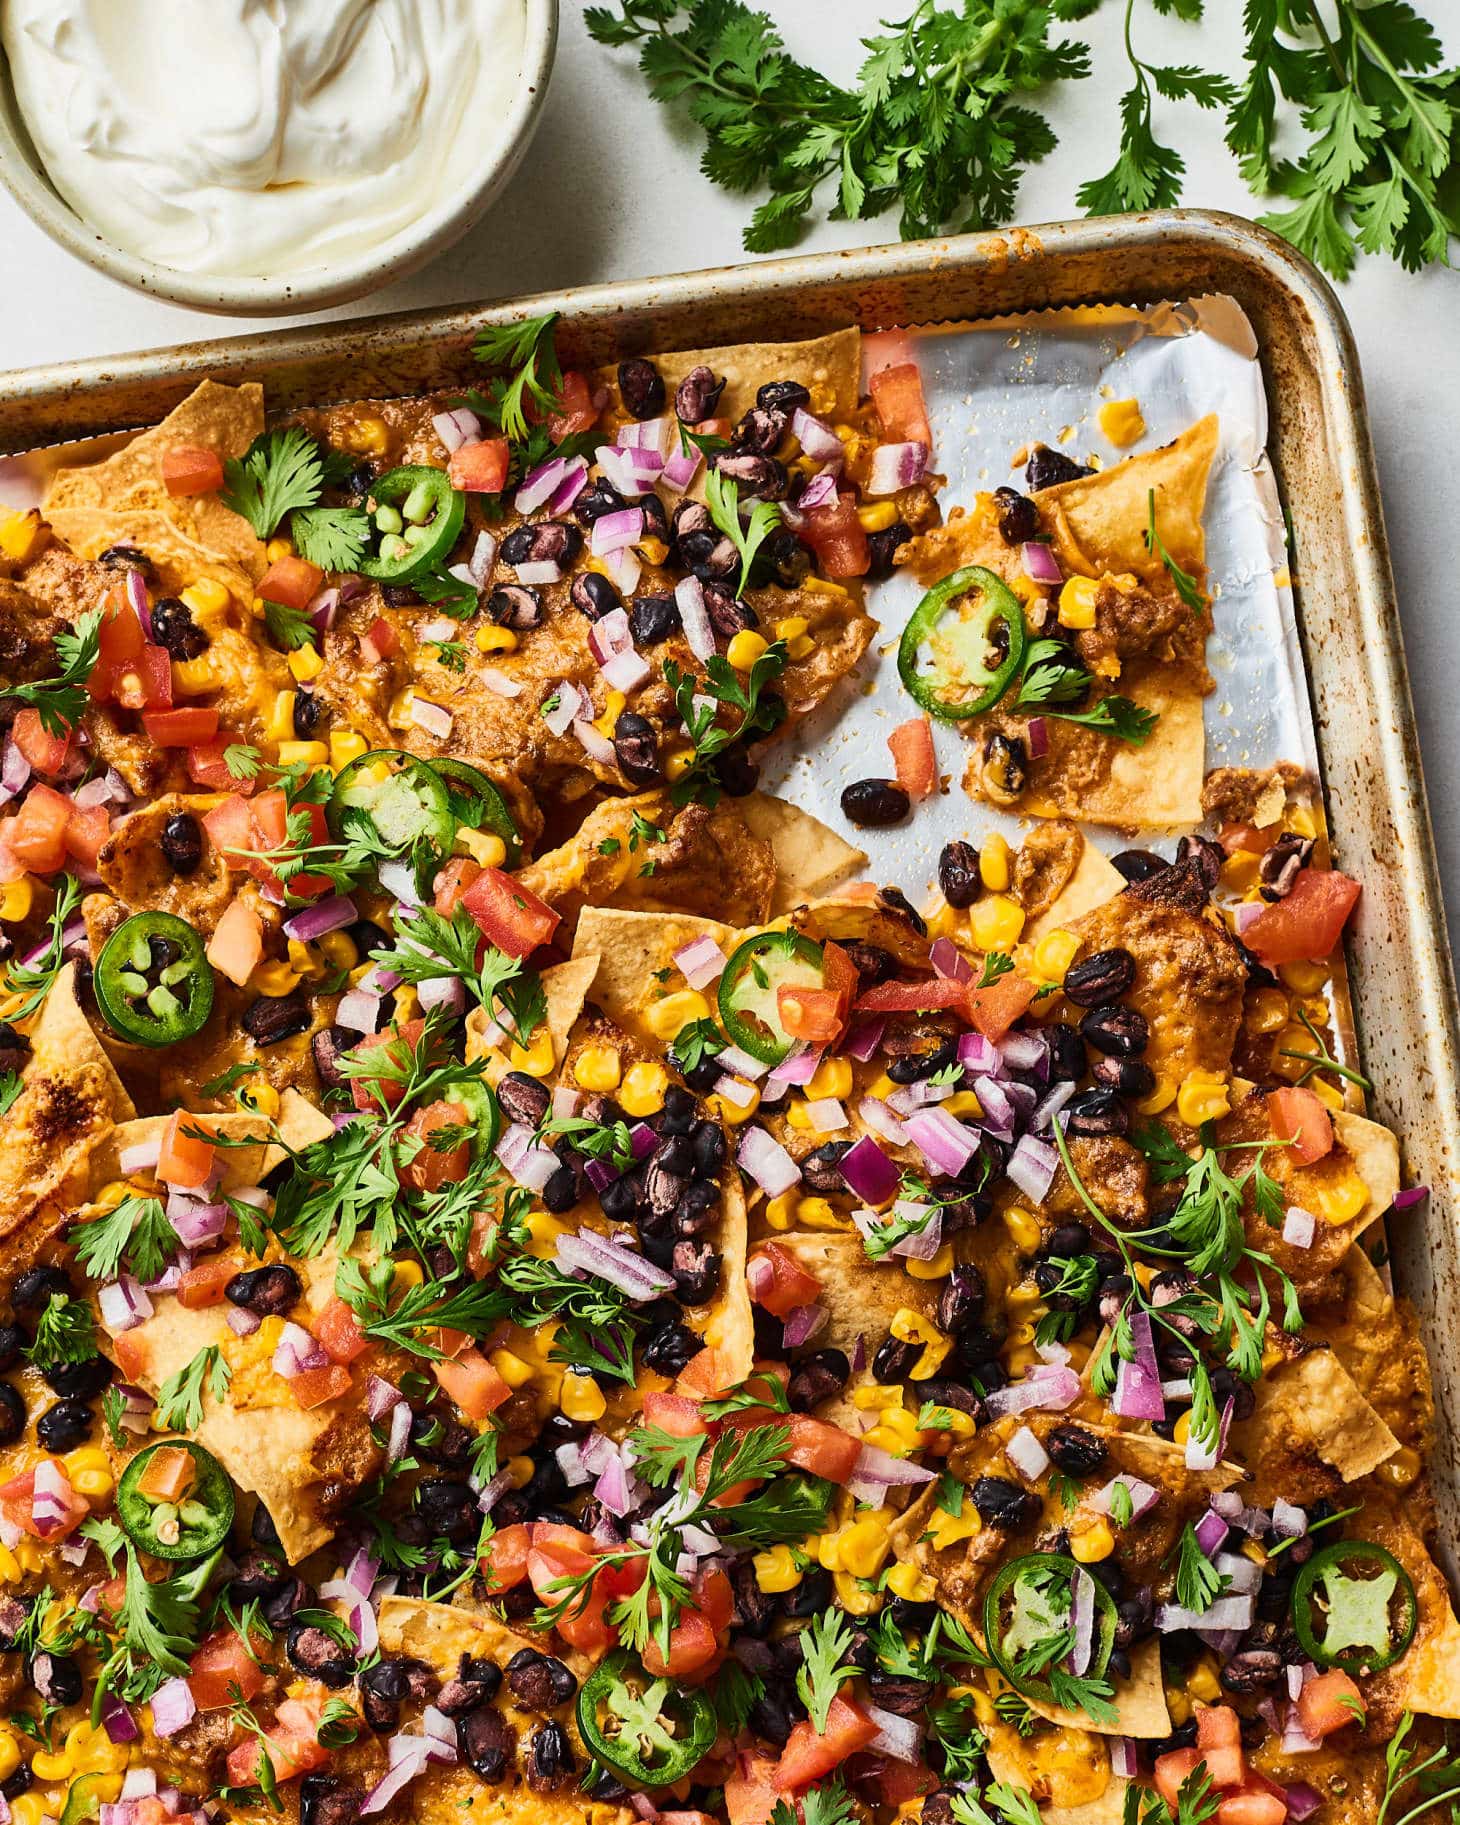 Make These Easy Nachos at Home